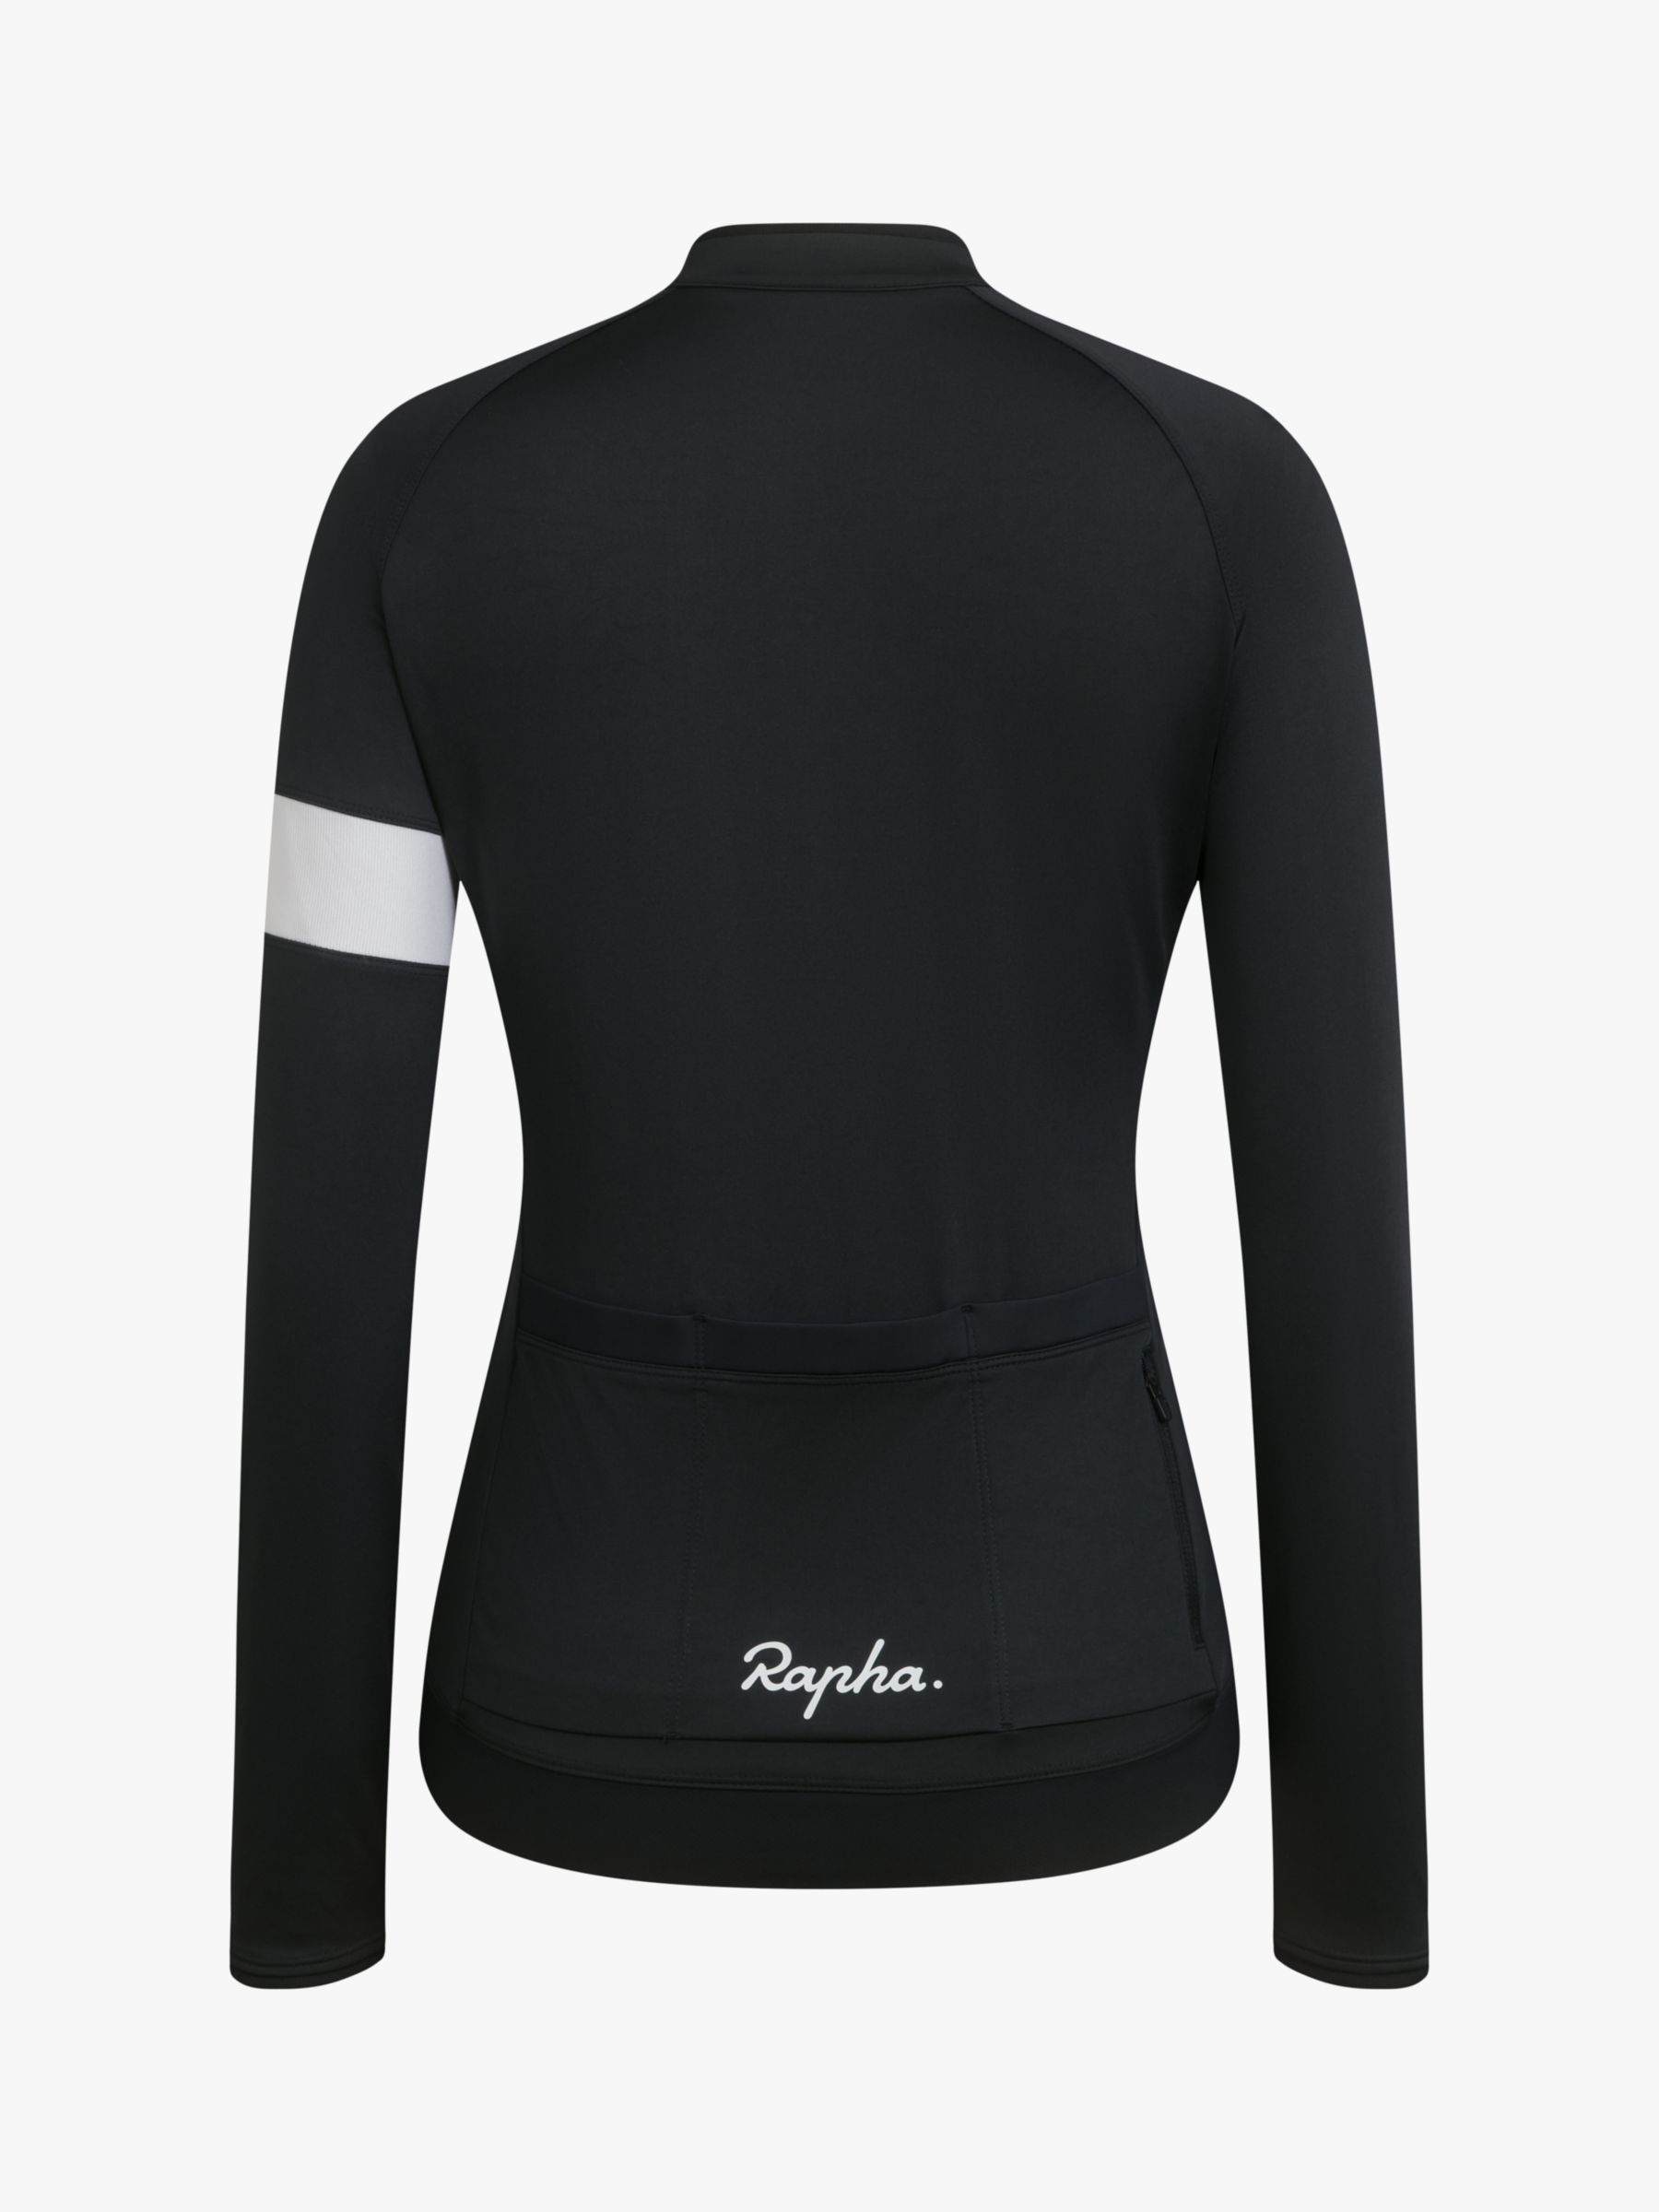 Rapha Core Jersey Long Sleeve Cycling Top, Black/White, S